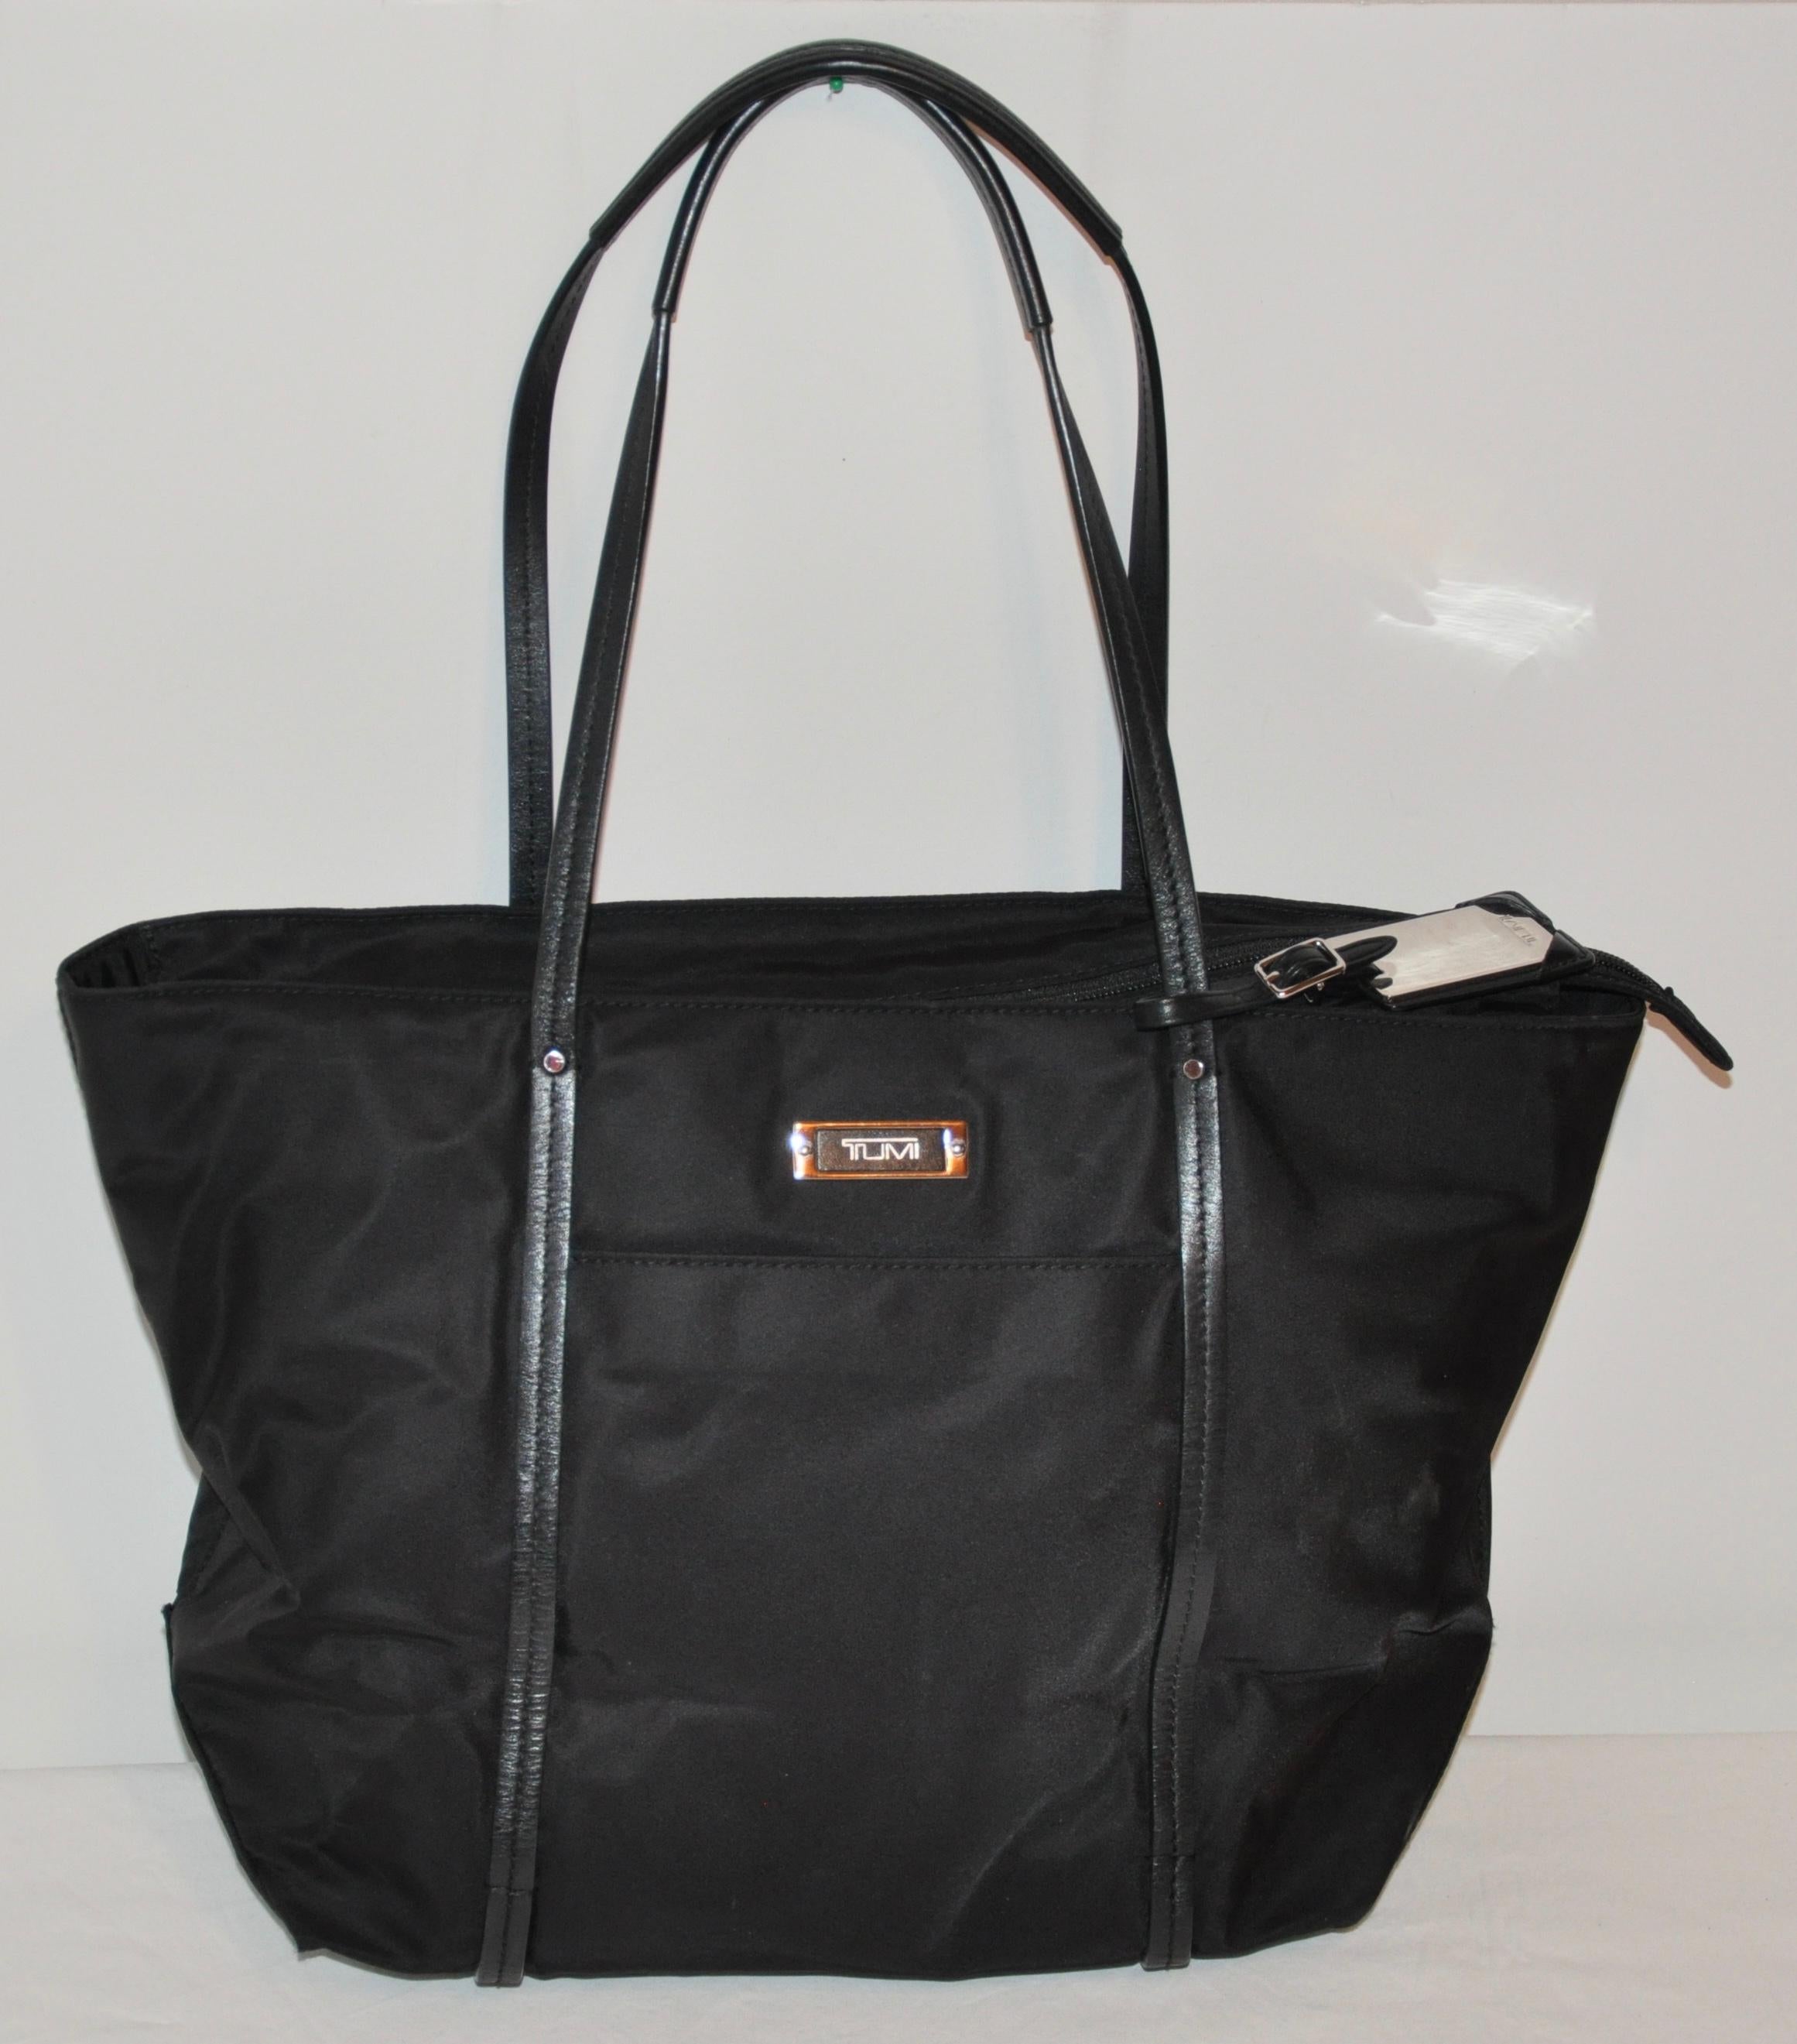 Tumi Black Nylon Accented with Black Calfskin Travel Tote For Sale at ...